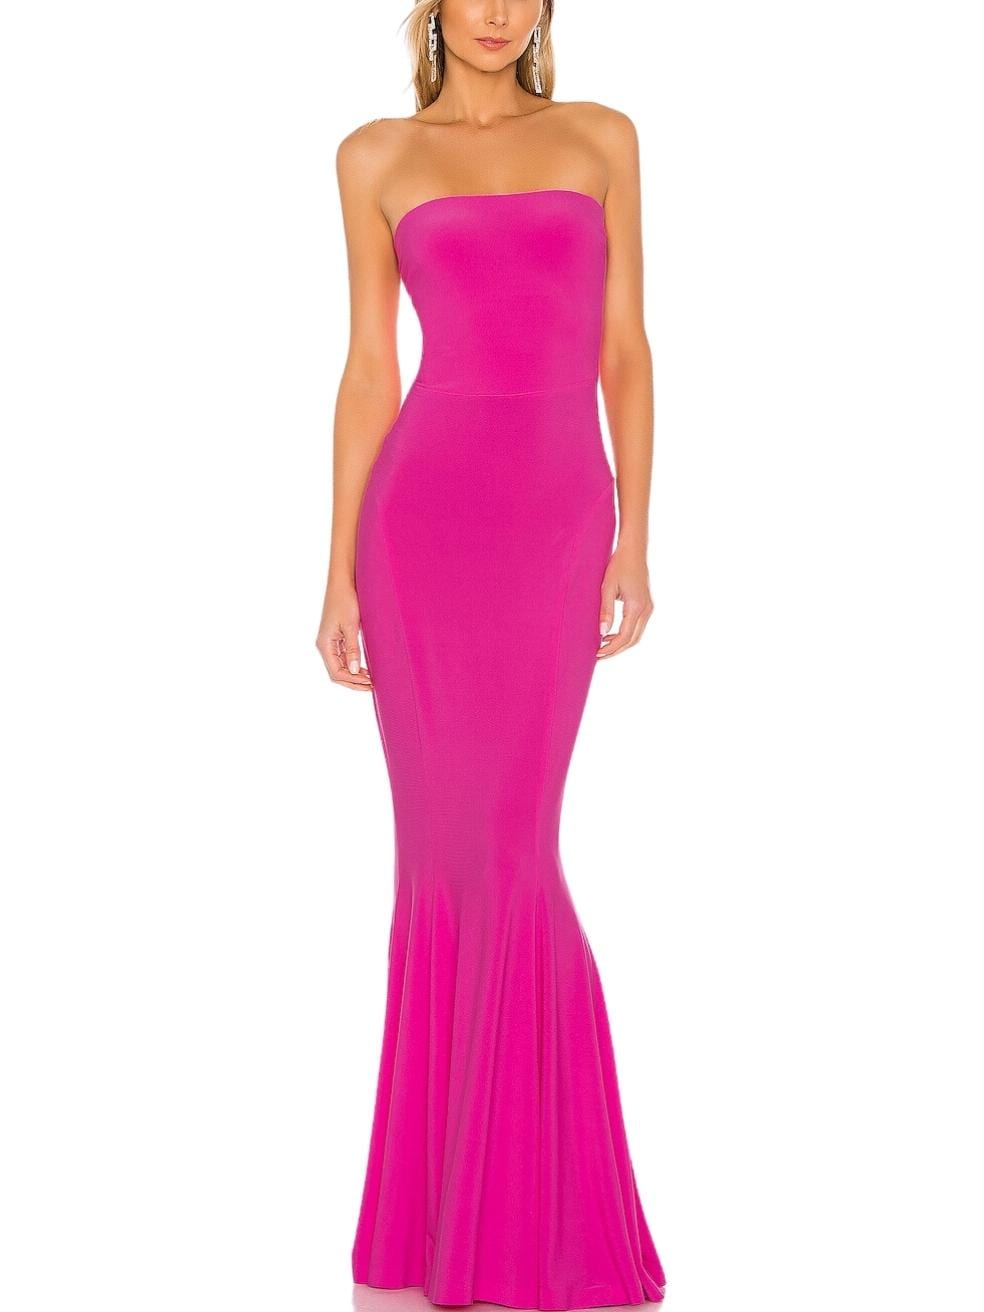 Strapless Fishtail Gown in Pink